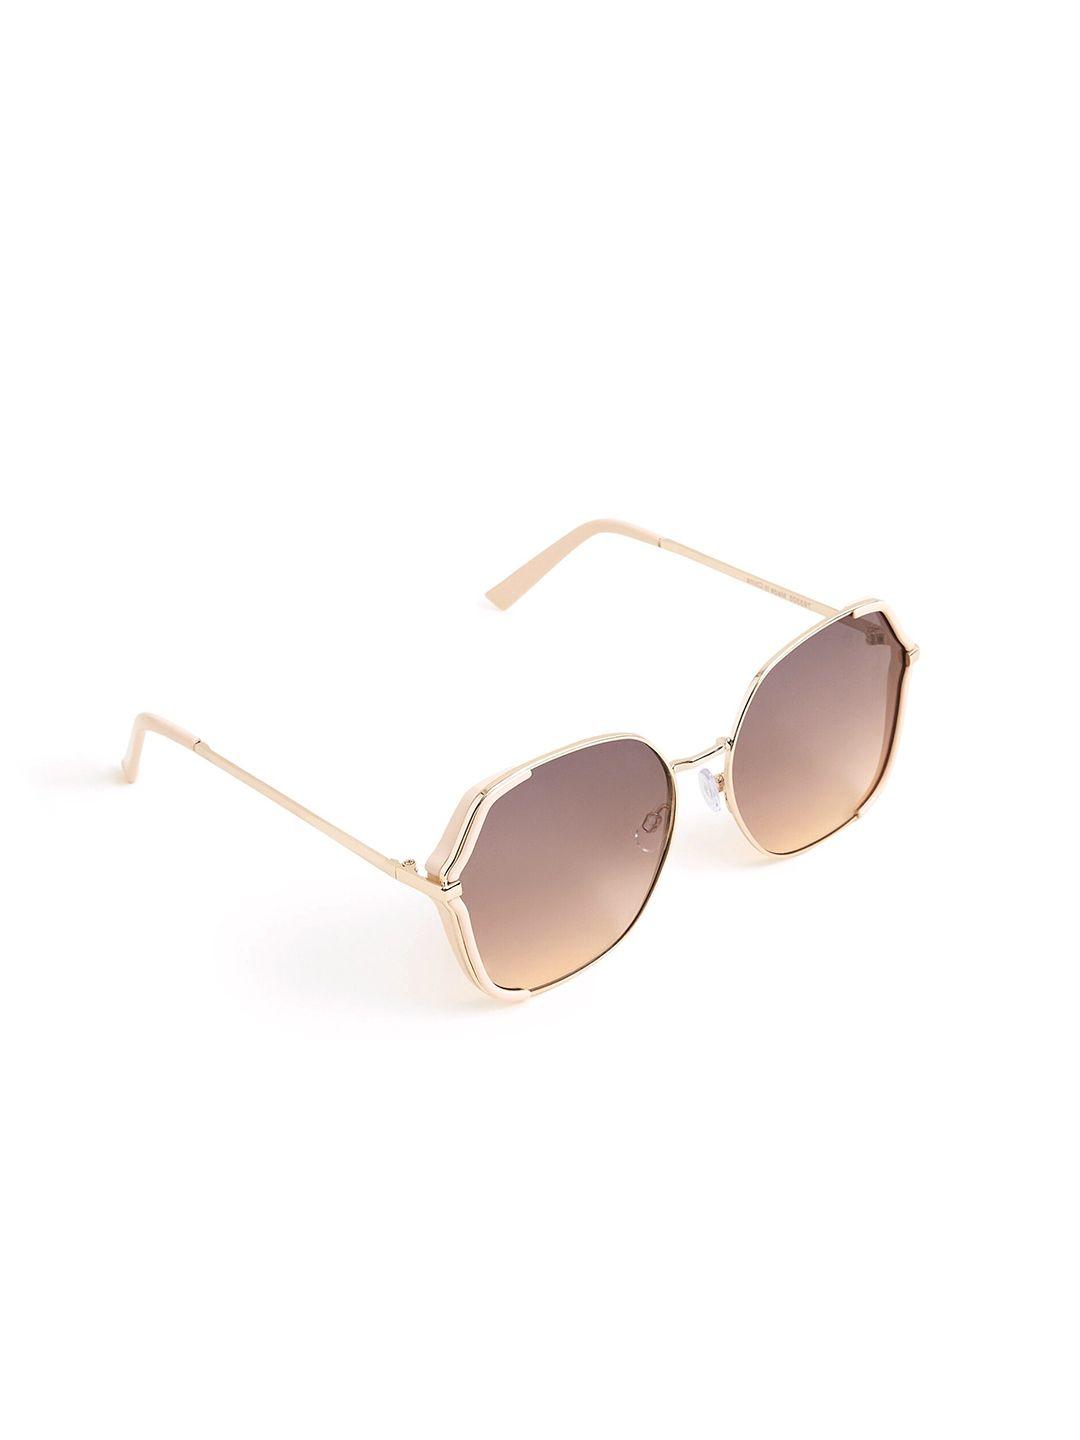 accessorize-women-oversized-sunglasses-with-uv-protected-lens-ma-79330515001